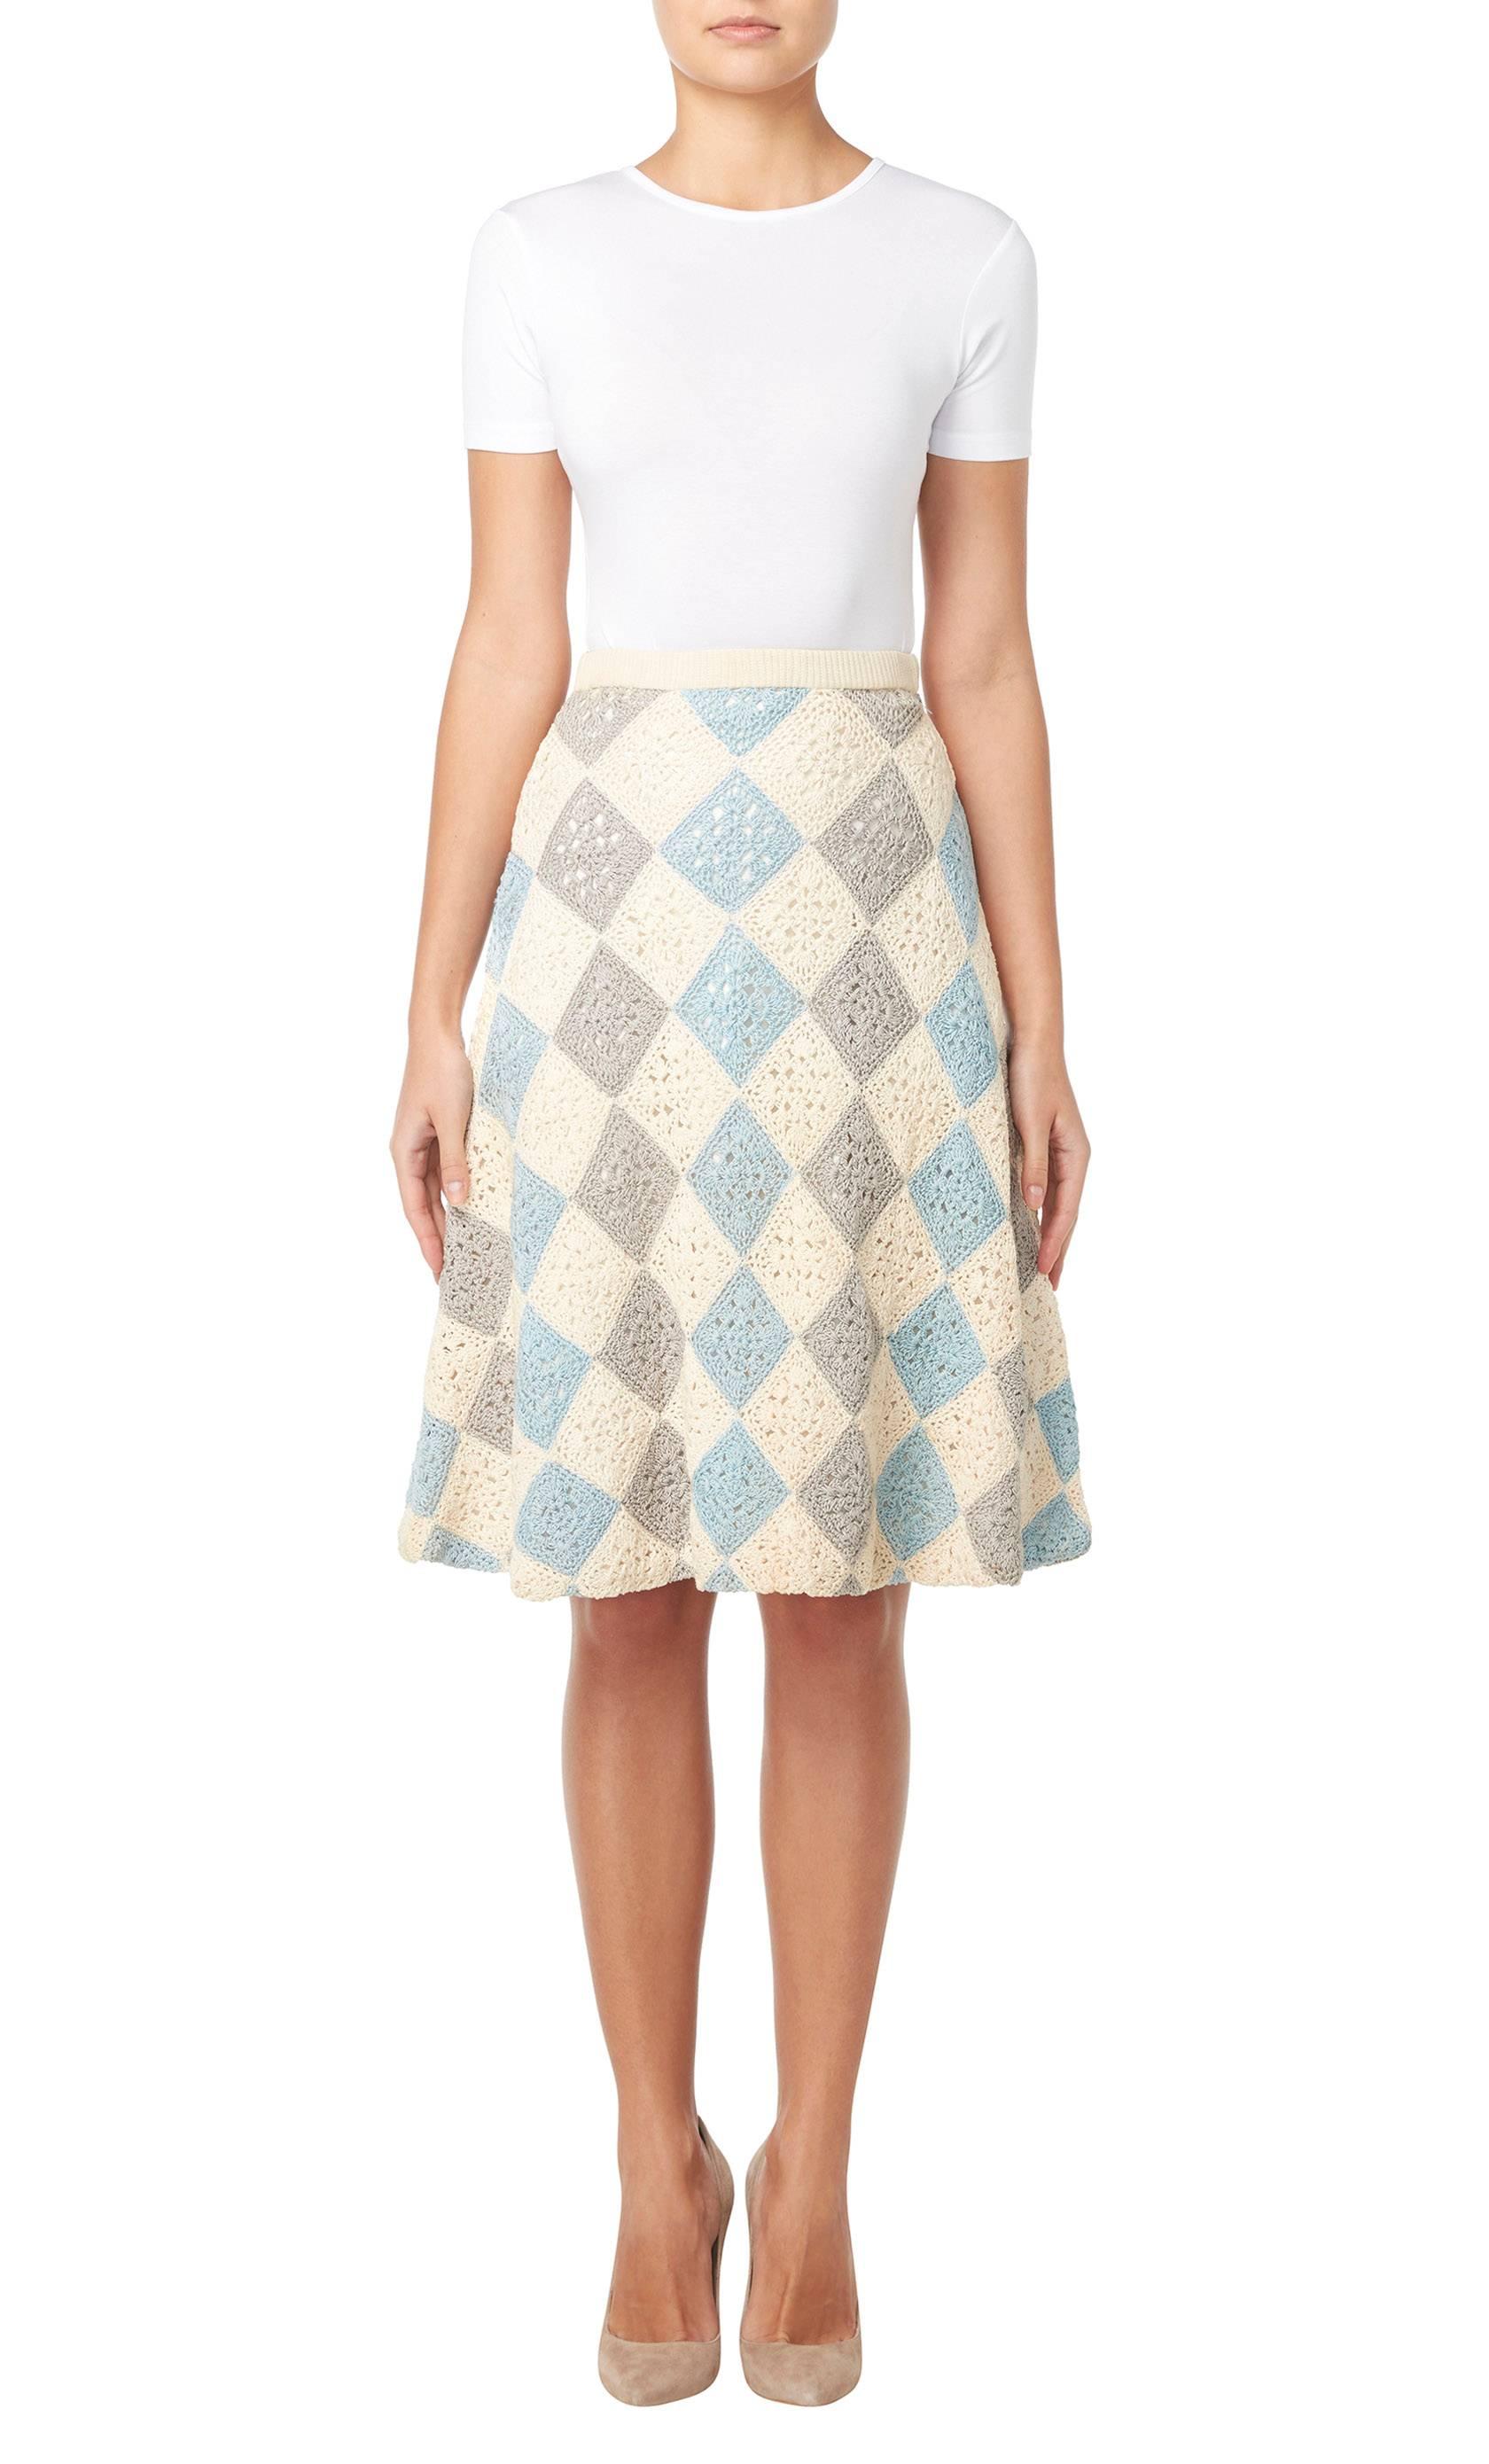 This Jean Dessès skirt is such a fun piece and great for the summer. Made up of crochet diamonds in blue, cream and grey wool, the skirt is fully lined in cotton, which adds structure to the A-line silhouette. Wear with a silk camisole and strappy